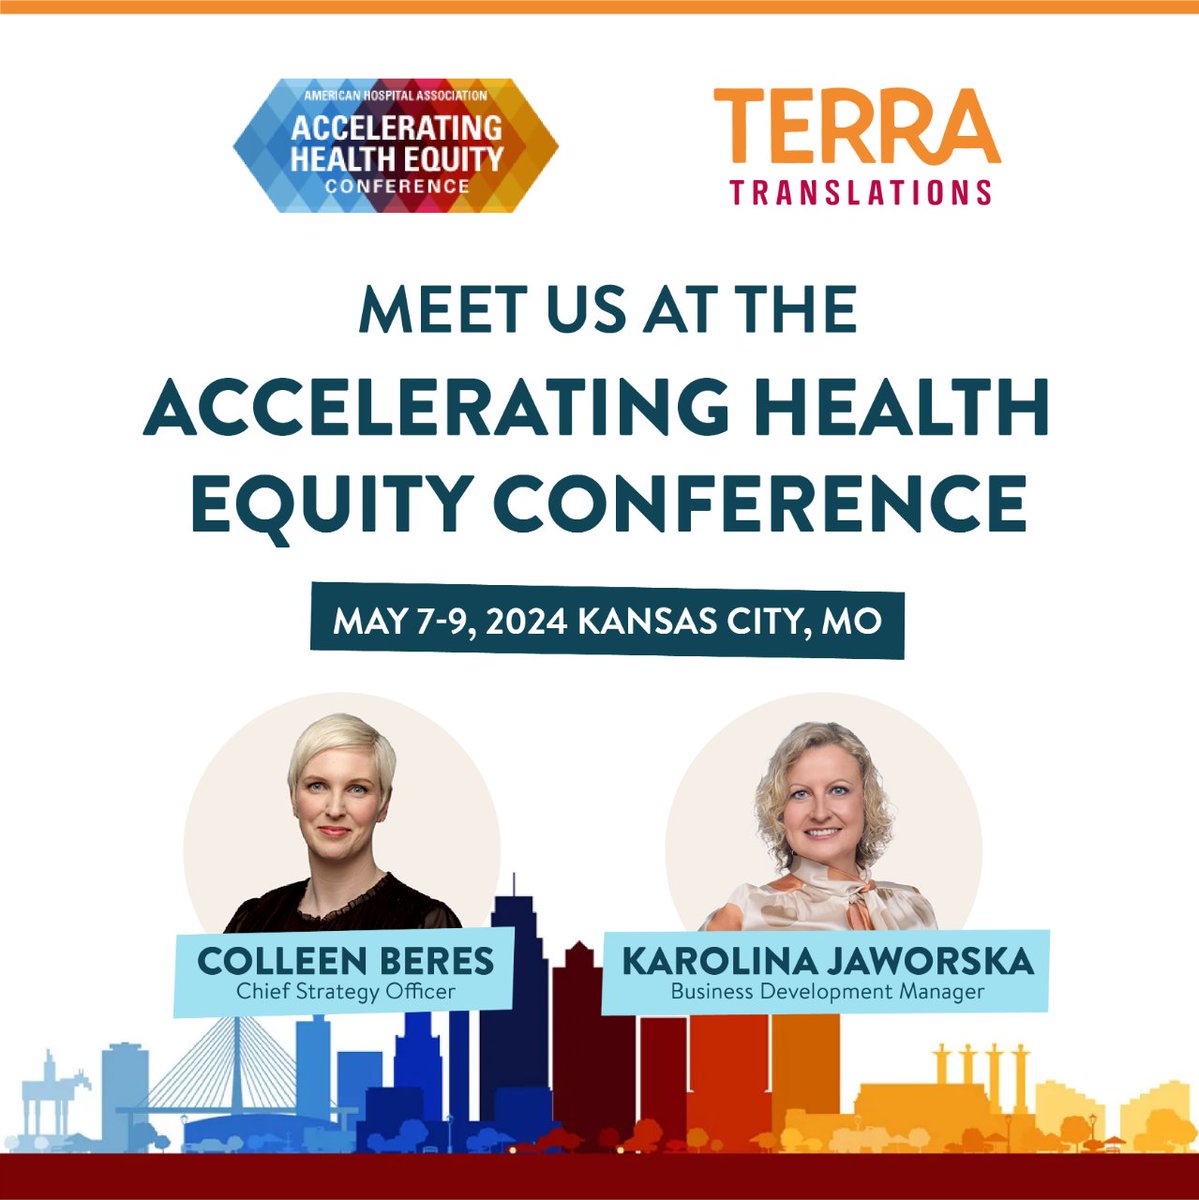 📌 We're heading to Kansas City for the 2024 Accelerating #HealthEquity Conference!

May 7-9, Colleen Beres and Karolina Jaworska will represent Terra at this three-day event that will convene more than 1,000 health professionals.

We hope to see you there!

#HealthEquityConf